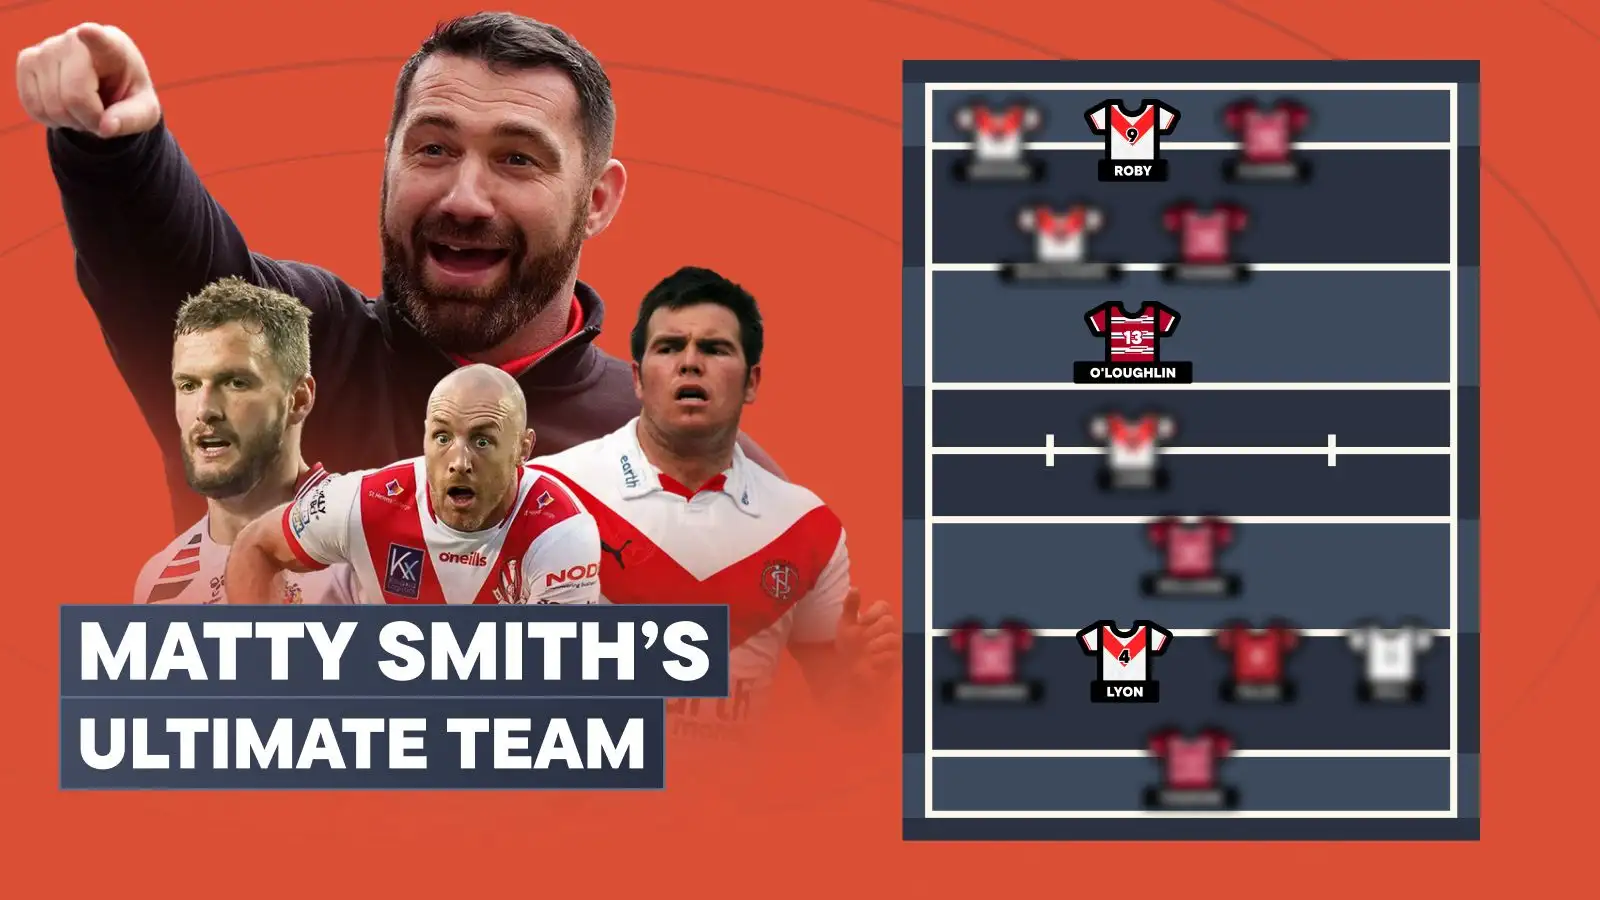 My Ultimate Team: Matty Smith names his best 13 including St Helens, Wigan Warriors legends